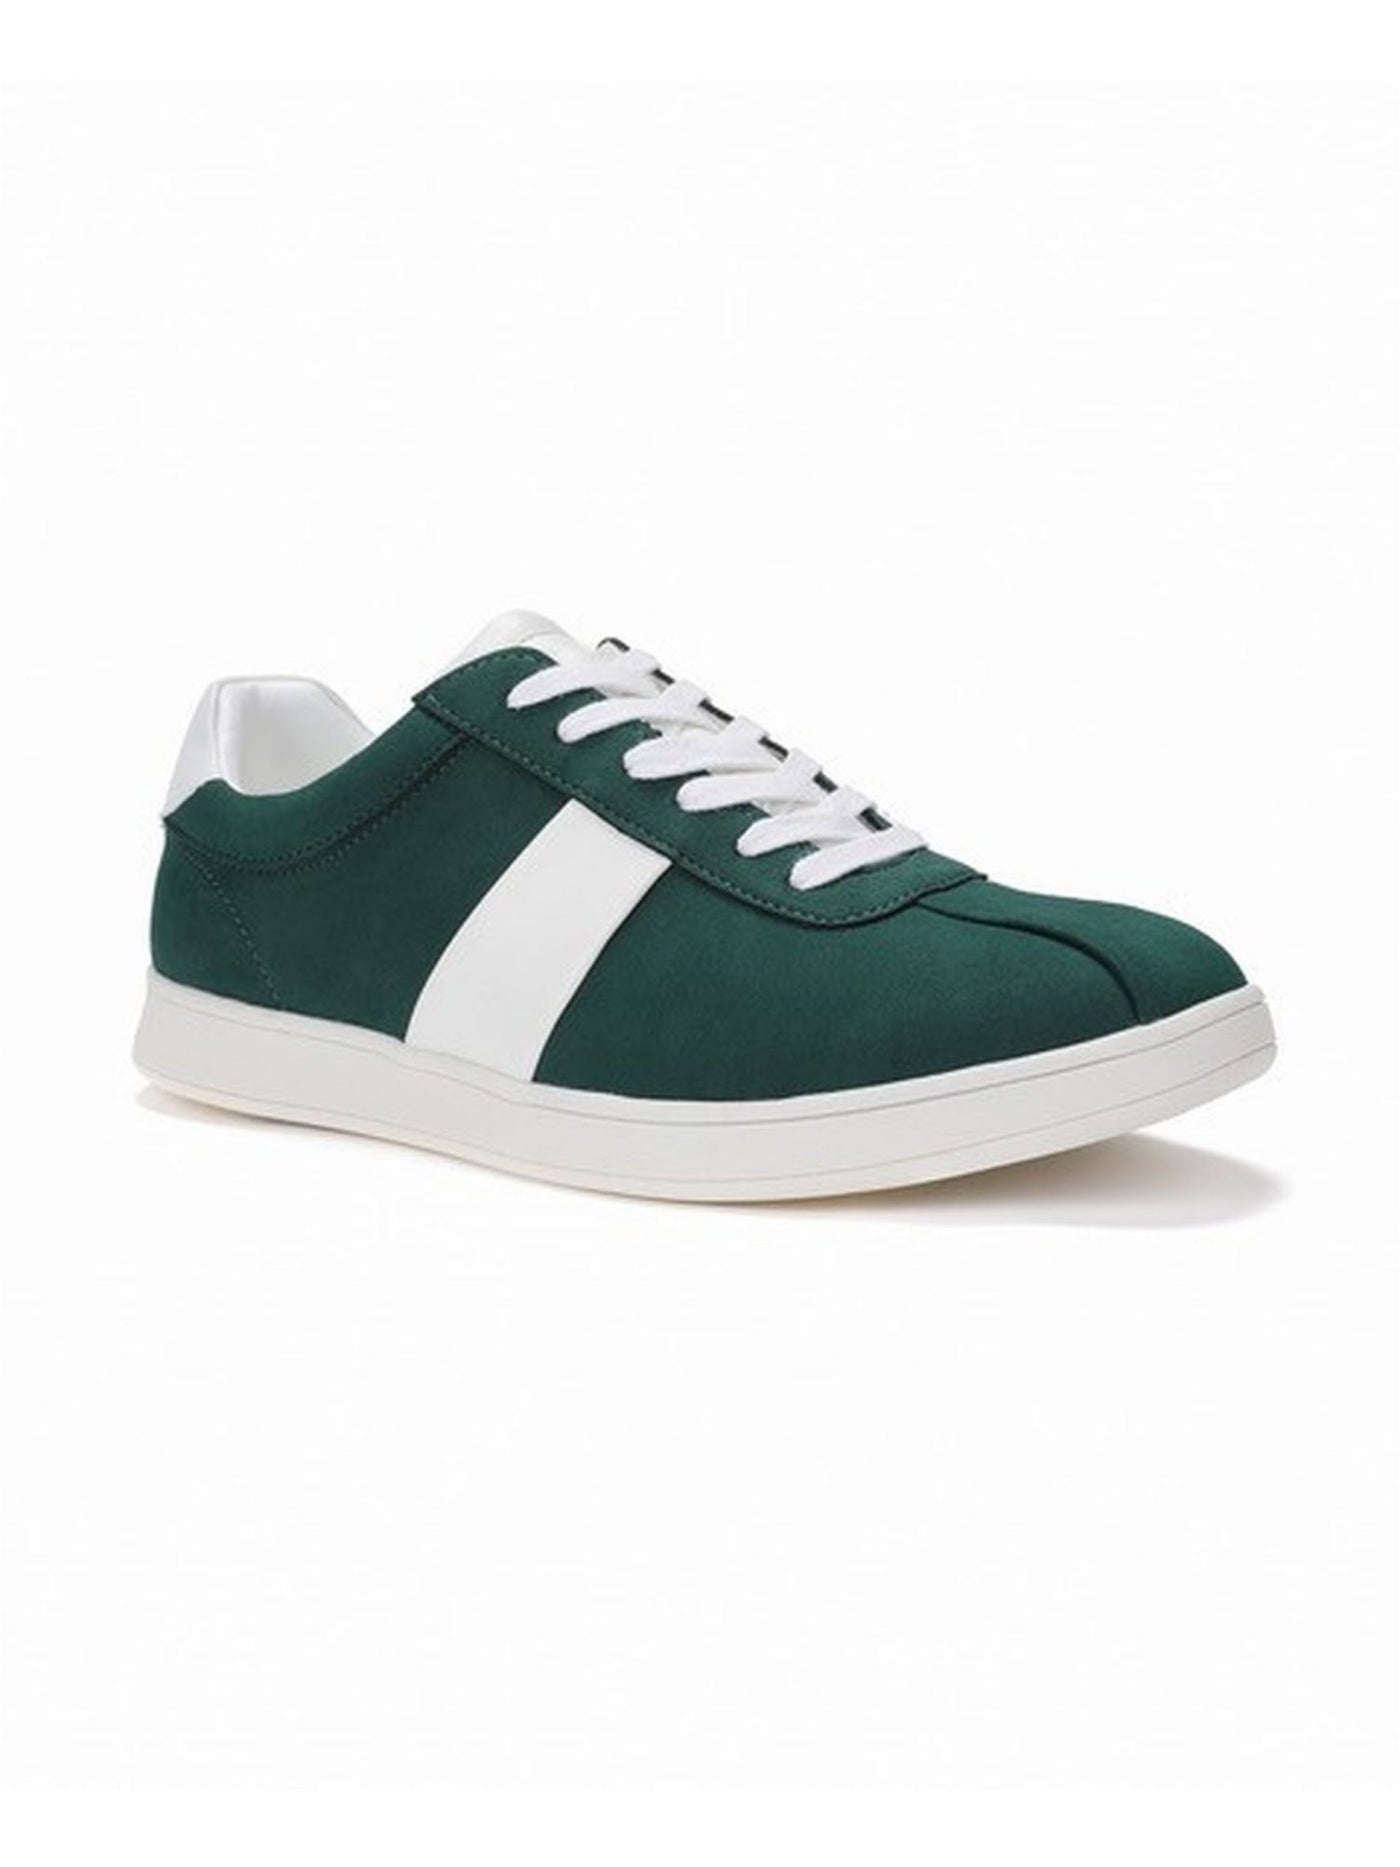 CLUBROOM Mens Green Comfort Edwin Round Toe Platform Lace-Up Athletic Sneakers Shoes 10.5 M